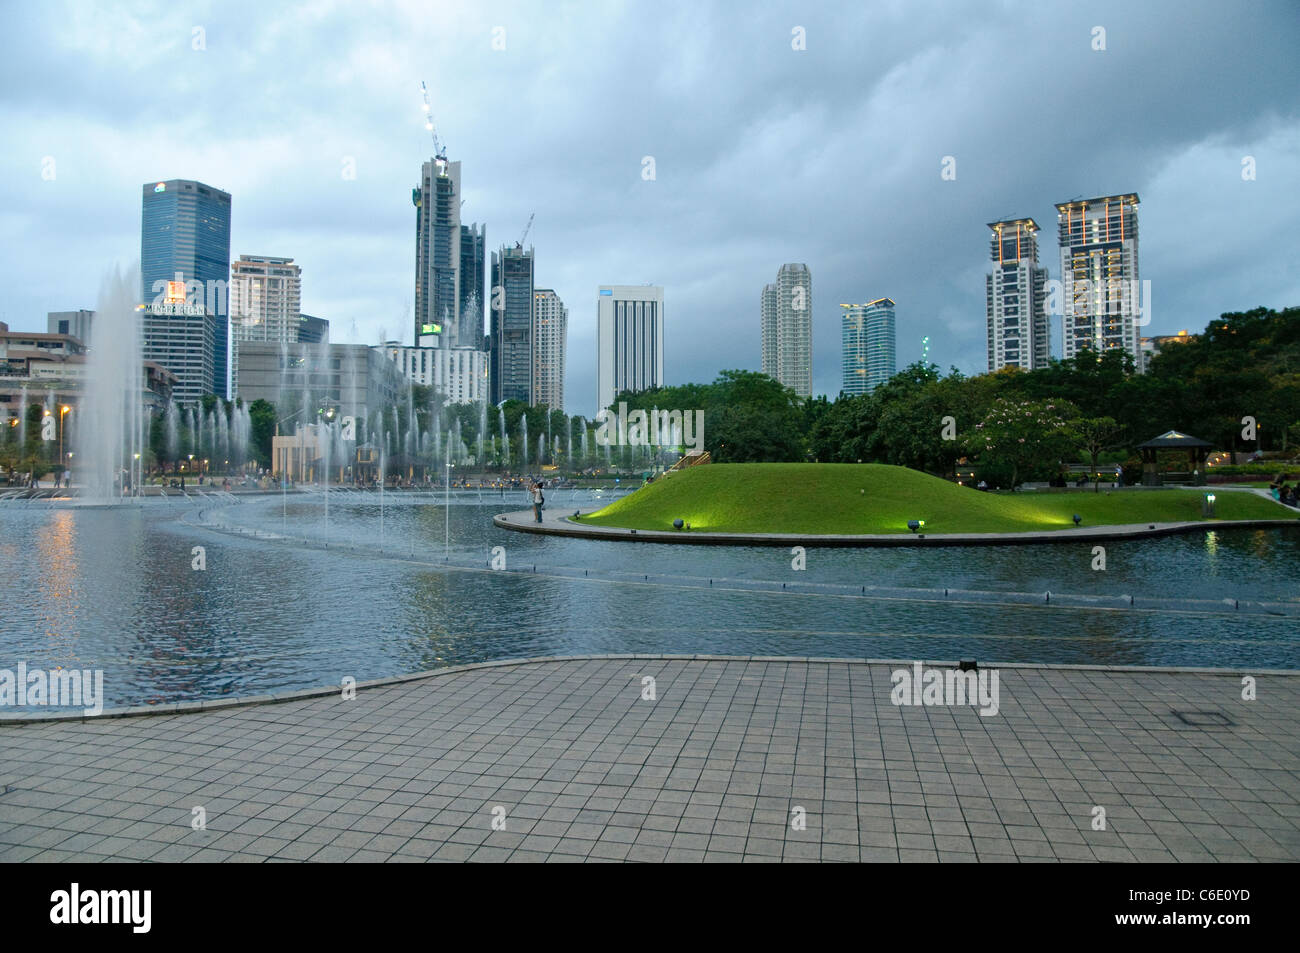 KLCC Park at the Petronas Twin Towers in front of the skyline with office buildings and hotels, Kuala Lumpur, Malaysia, Asia Stock Photo